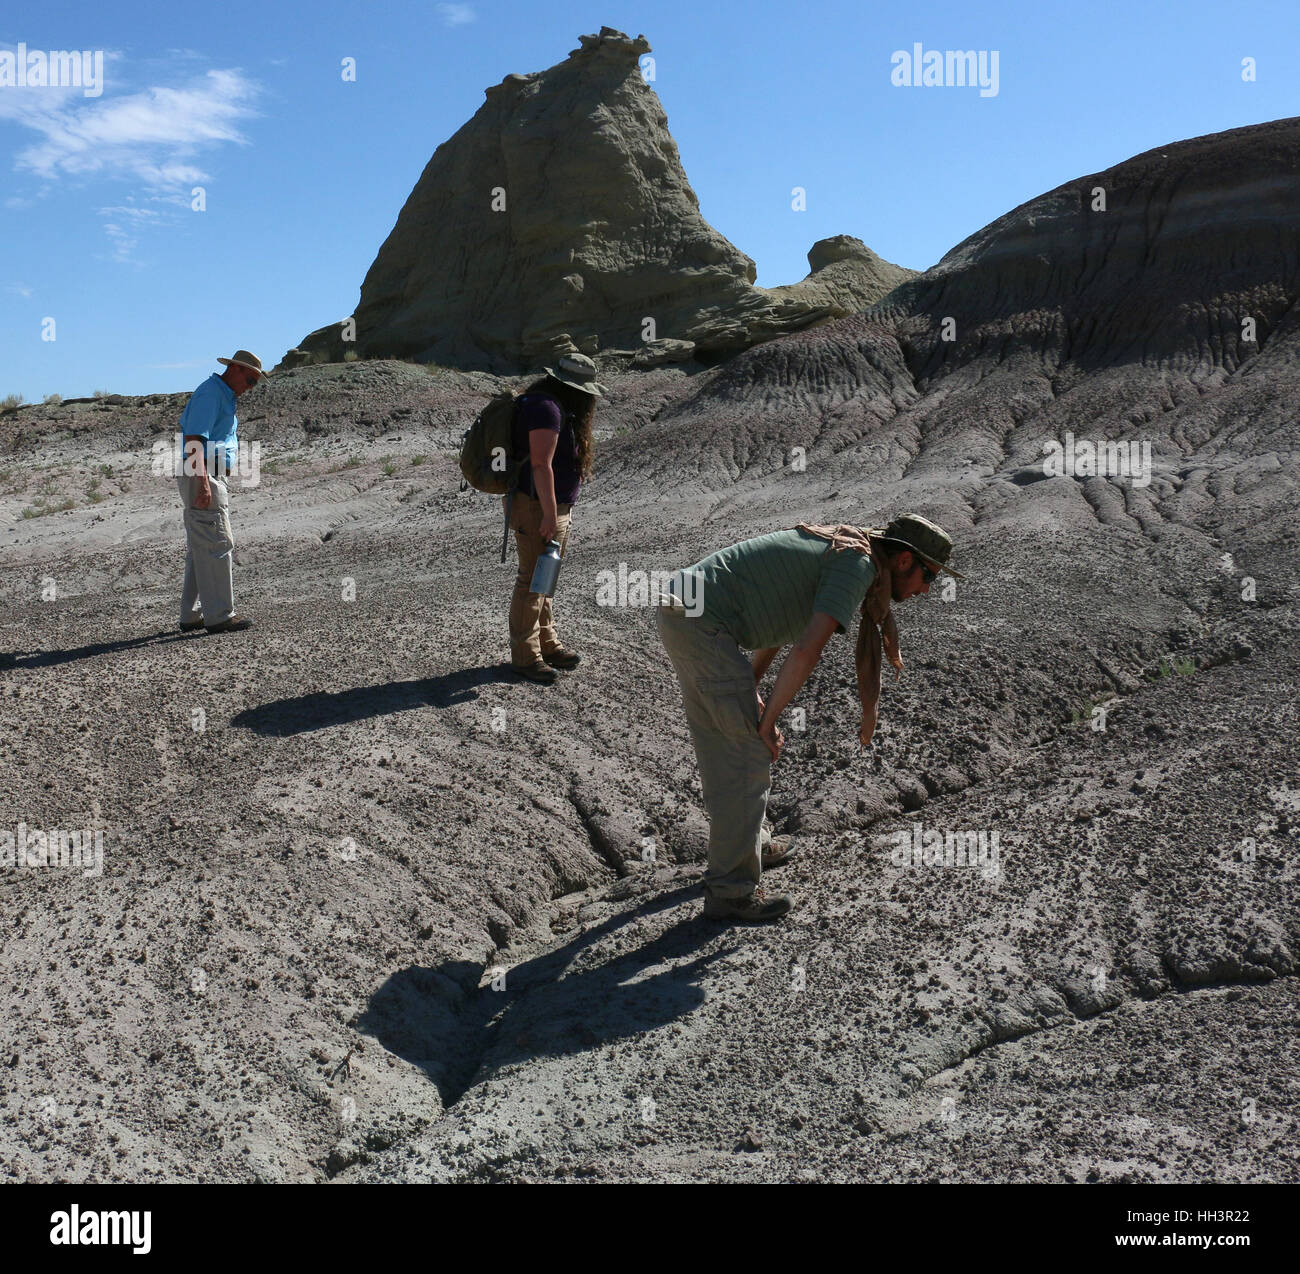 Paleontologists looking for fossils Utah Great Basin desert Stock Photo